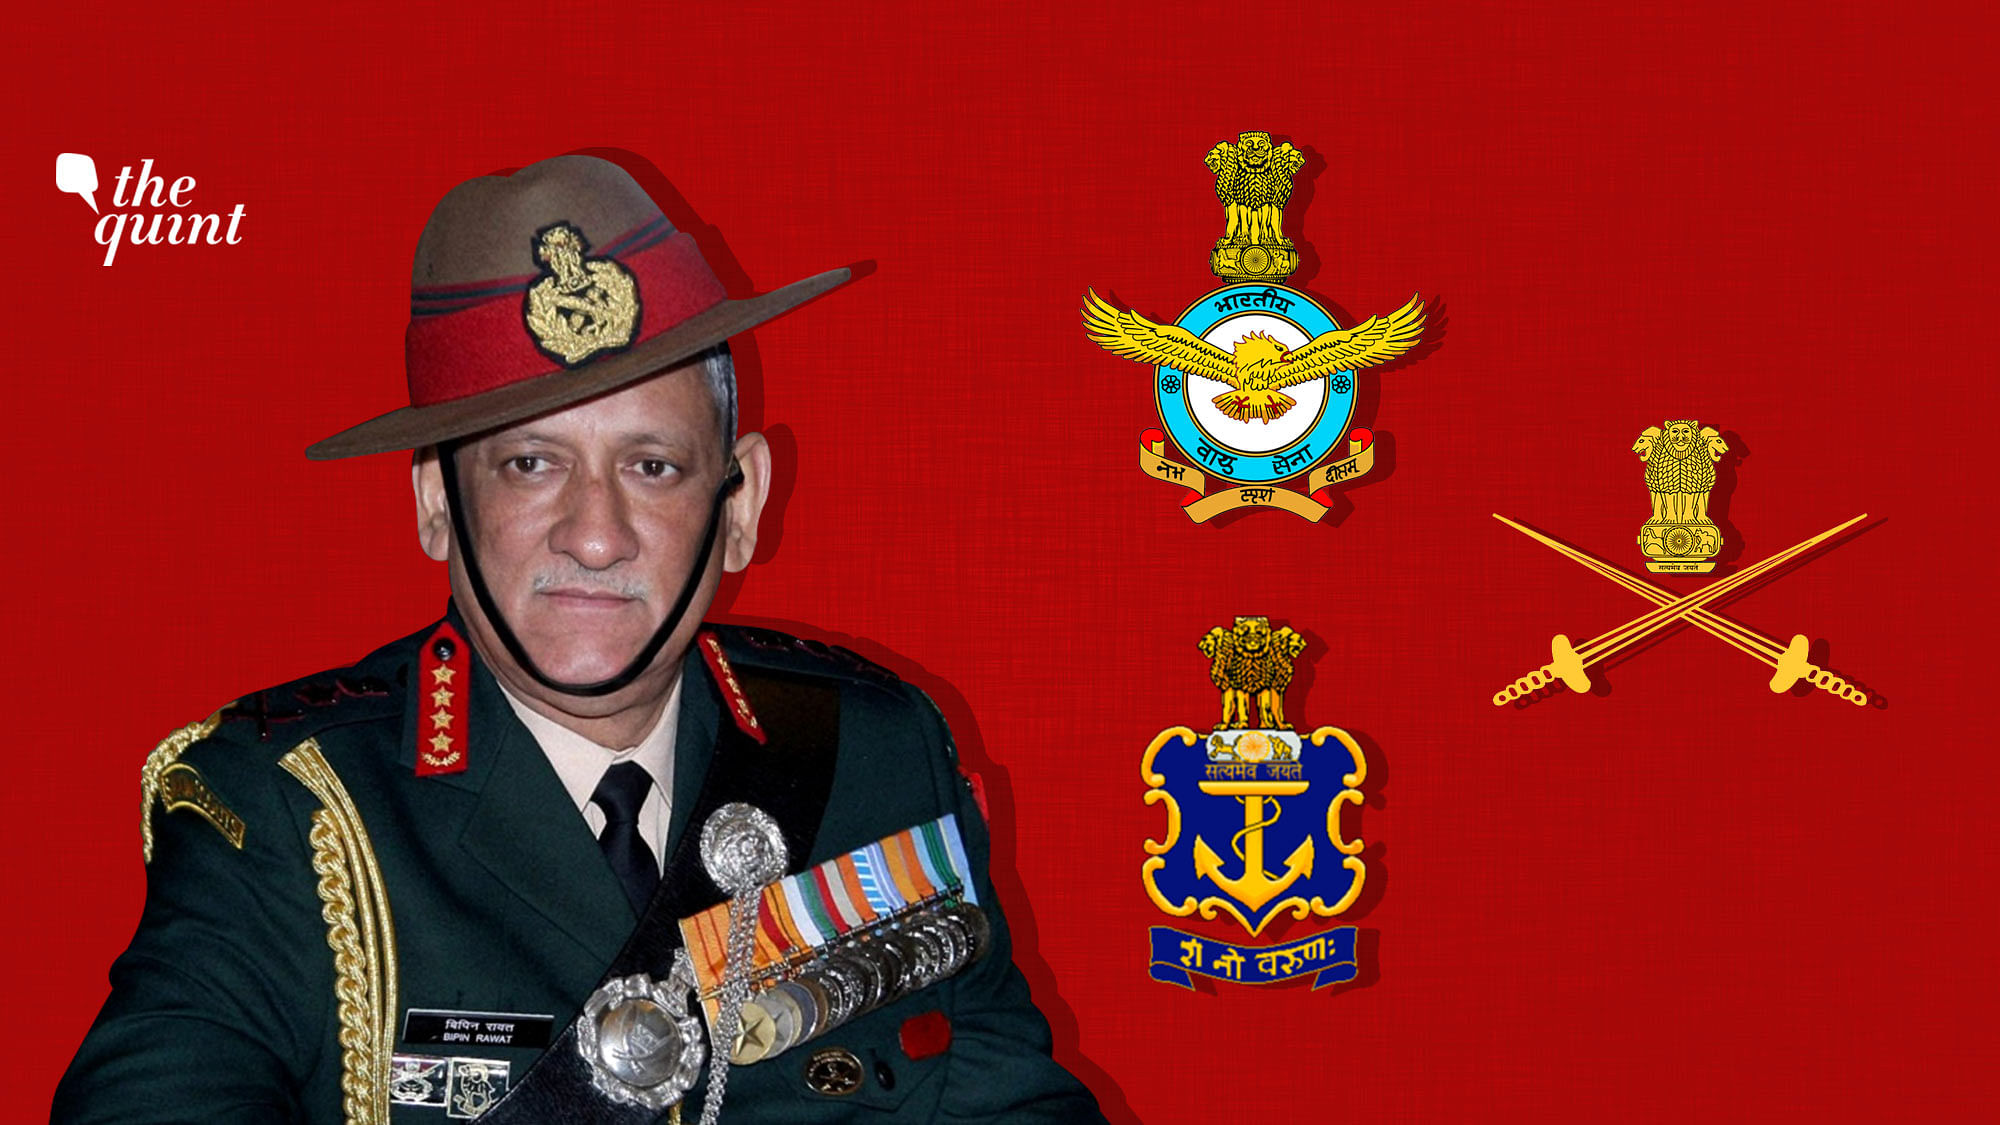 Image featuring Bipin Rawat (the new CDS) and the symbols for the three Services used for representational purposes.